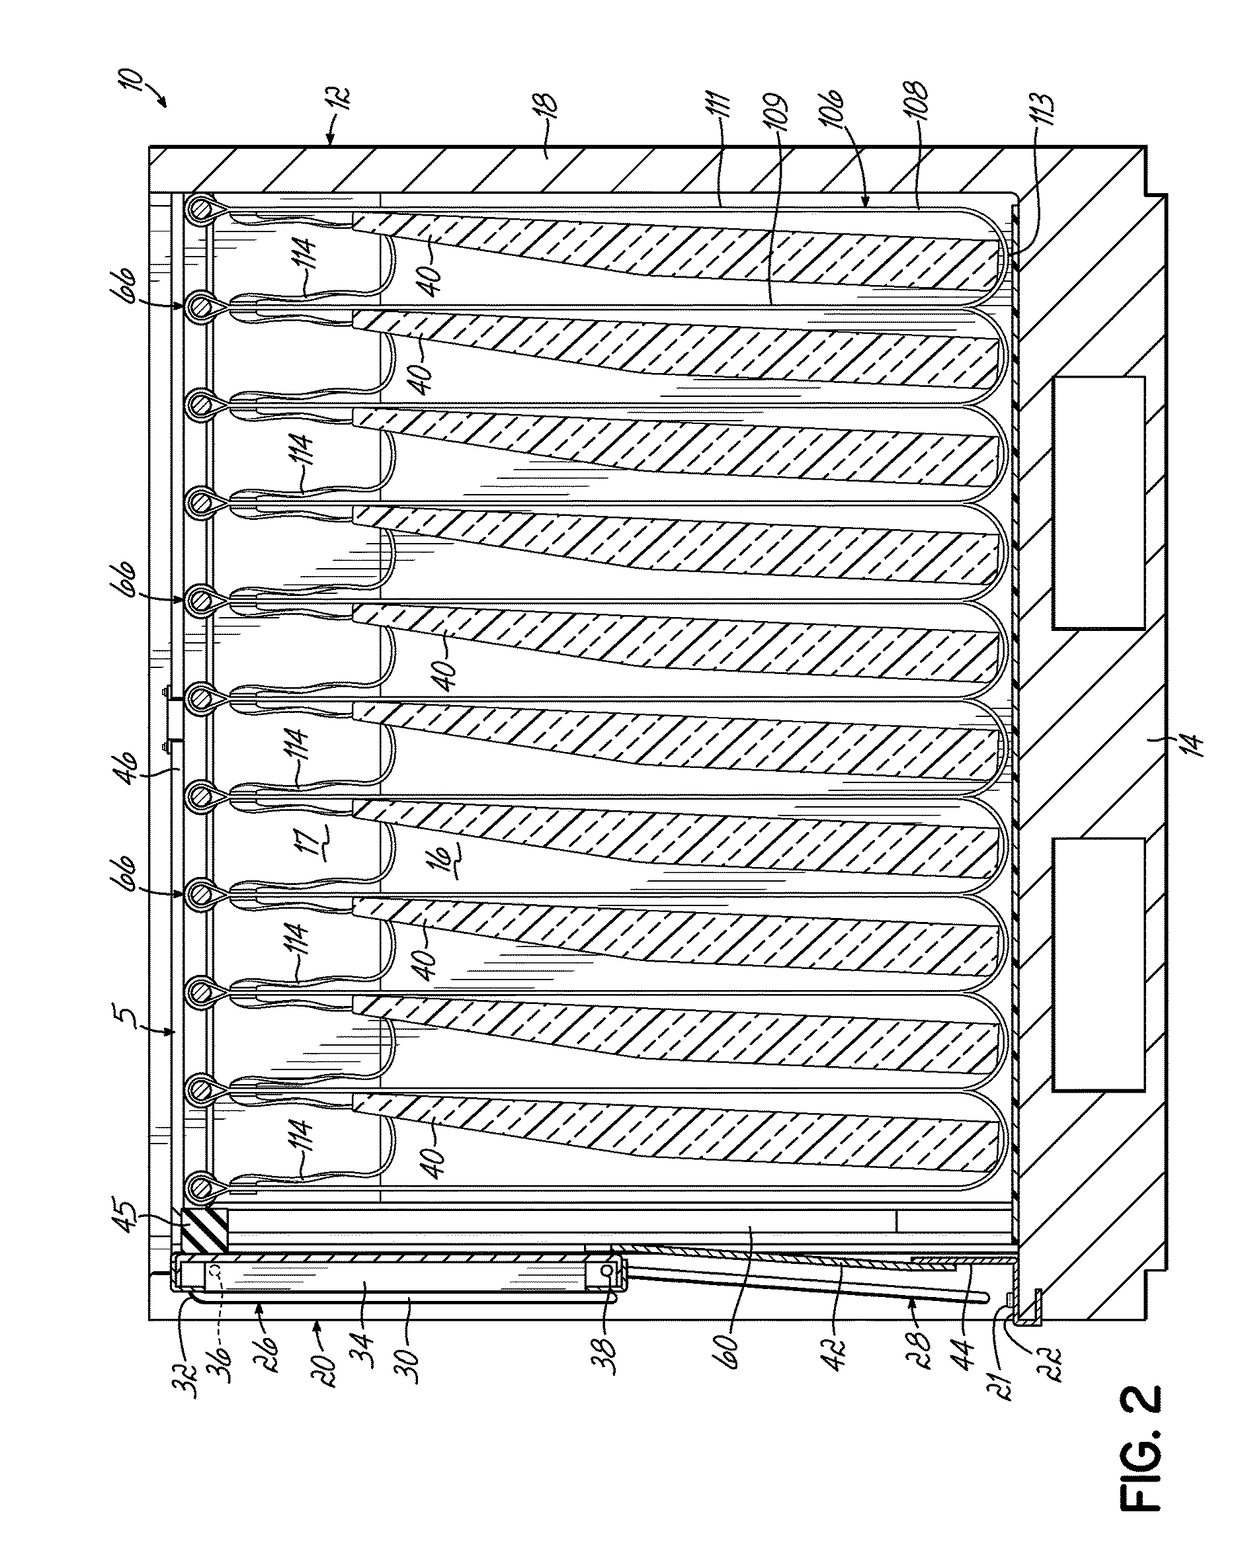 Container Having Generally L-Shaped Slotted Tracks To Facilitate Movement of Dunnage